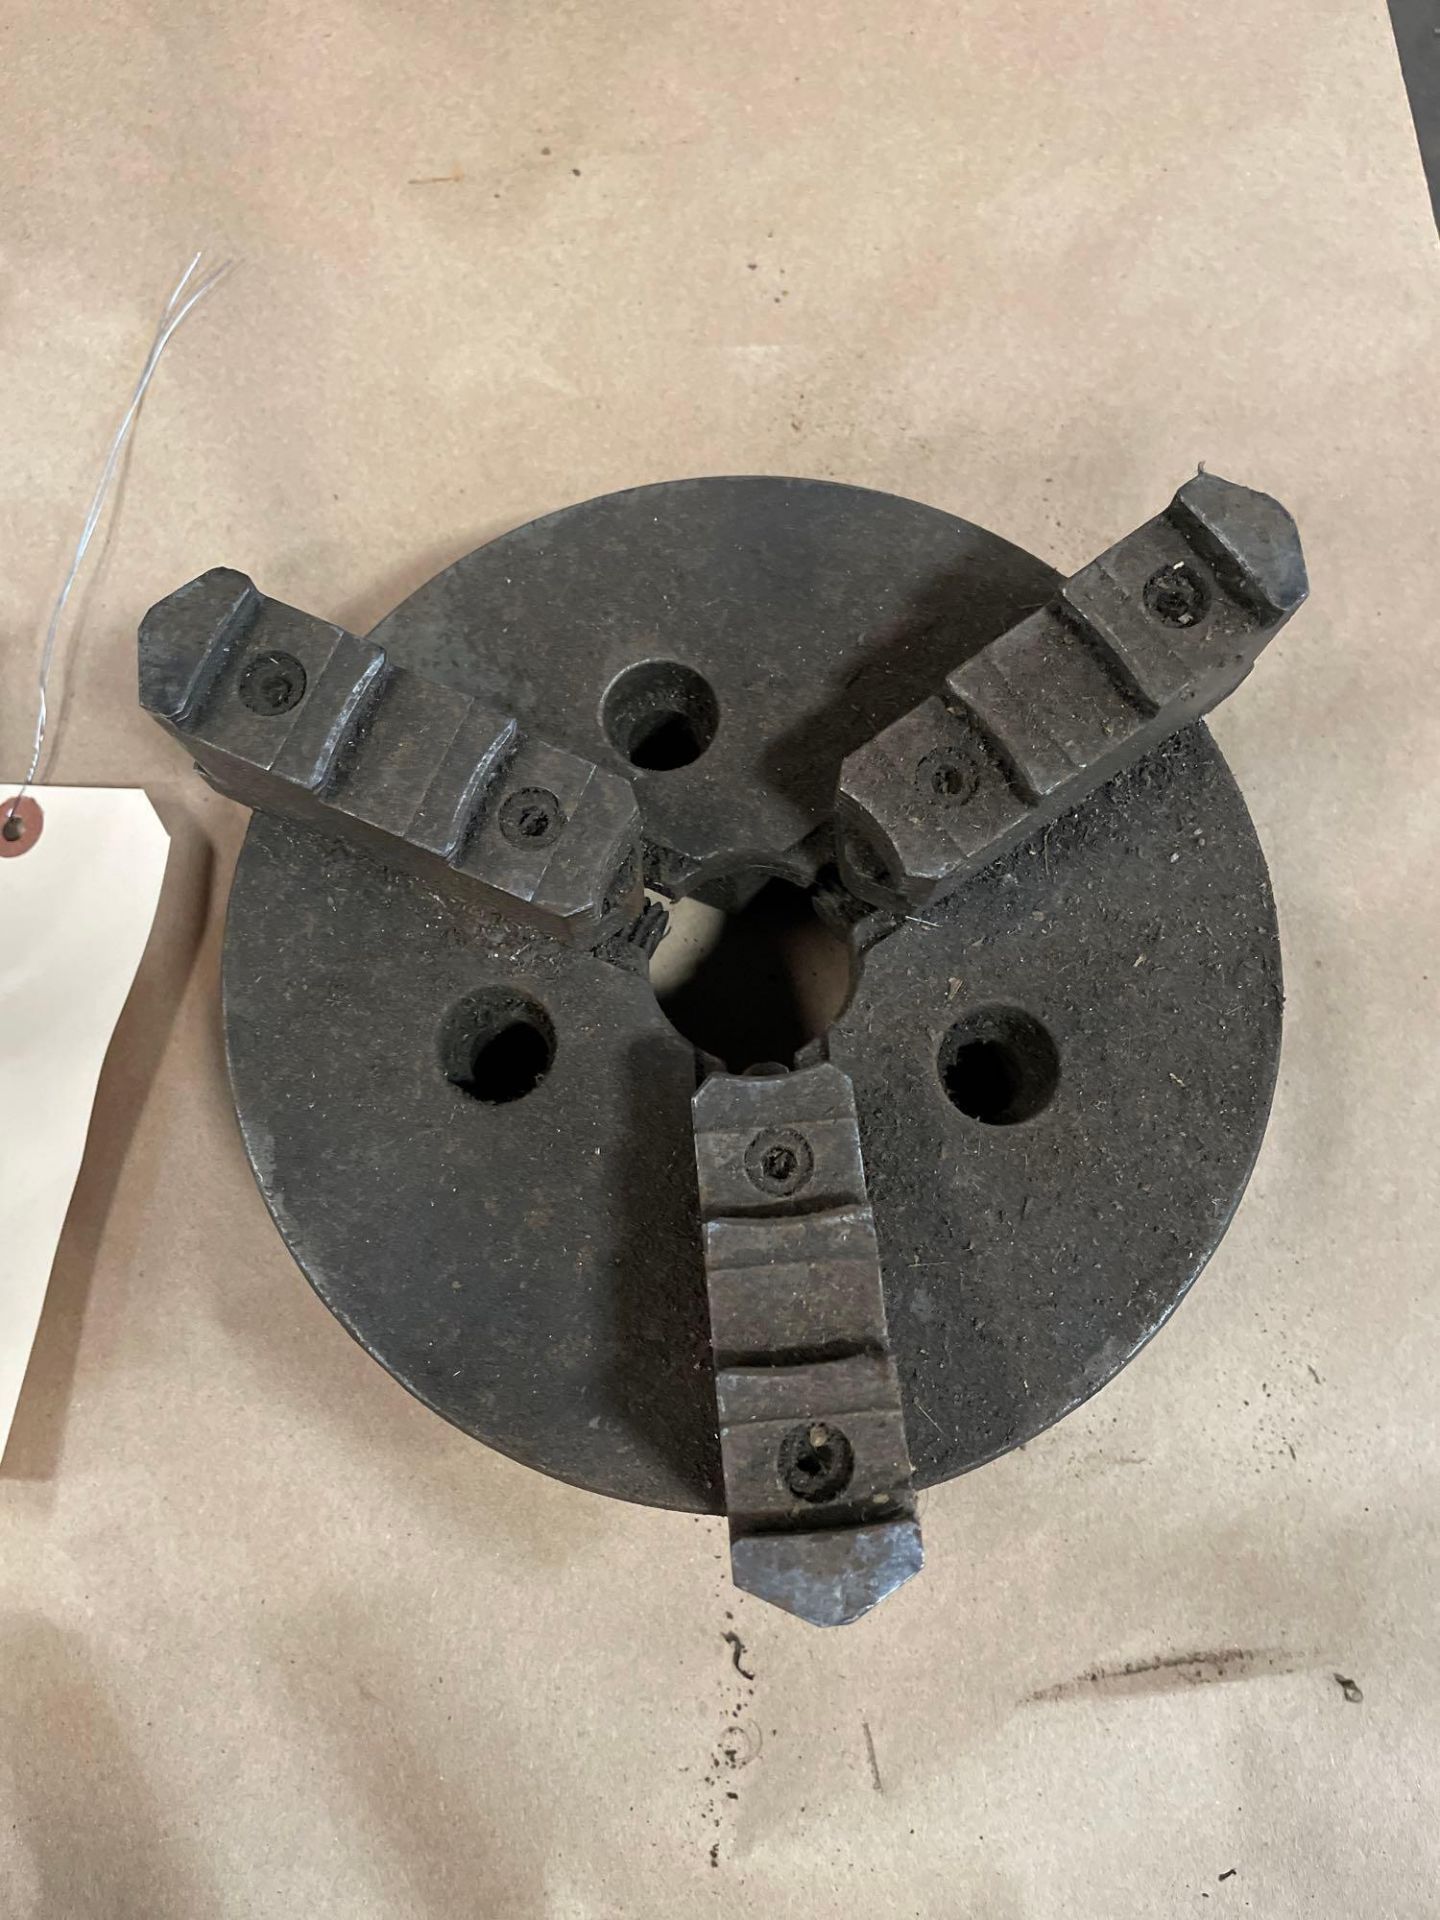 Lot of 3 Chucks: (1) 8" 3-Jaw Chuck, (1) 10" 3-Jaw Chuck, (1) 10" 3-Jaw Chuck - Image 6 of 7